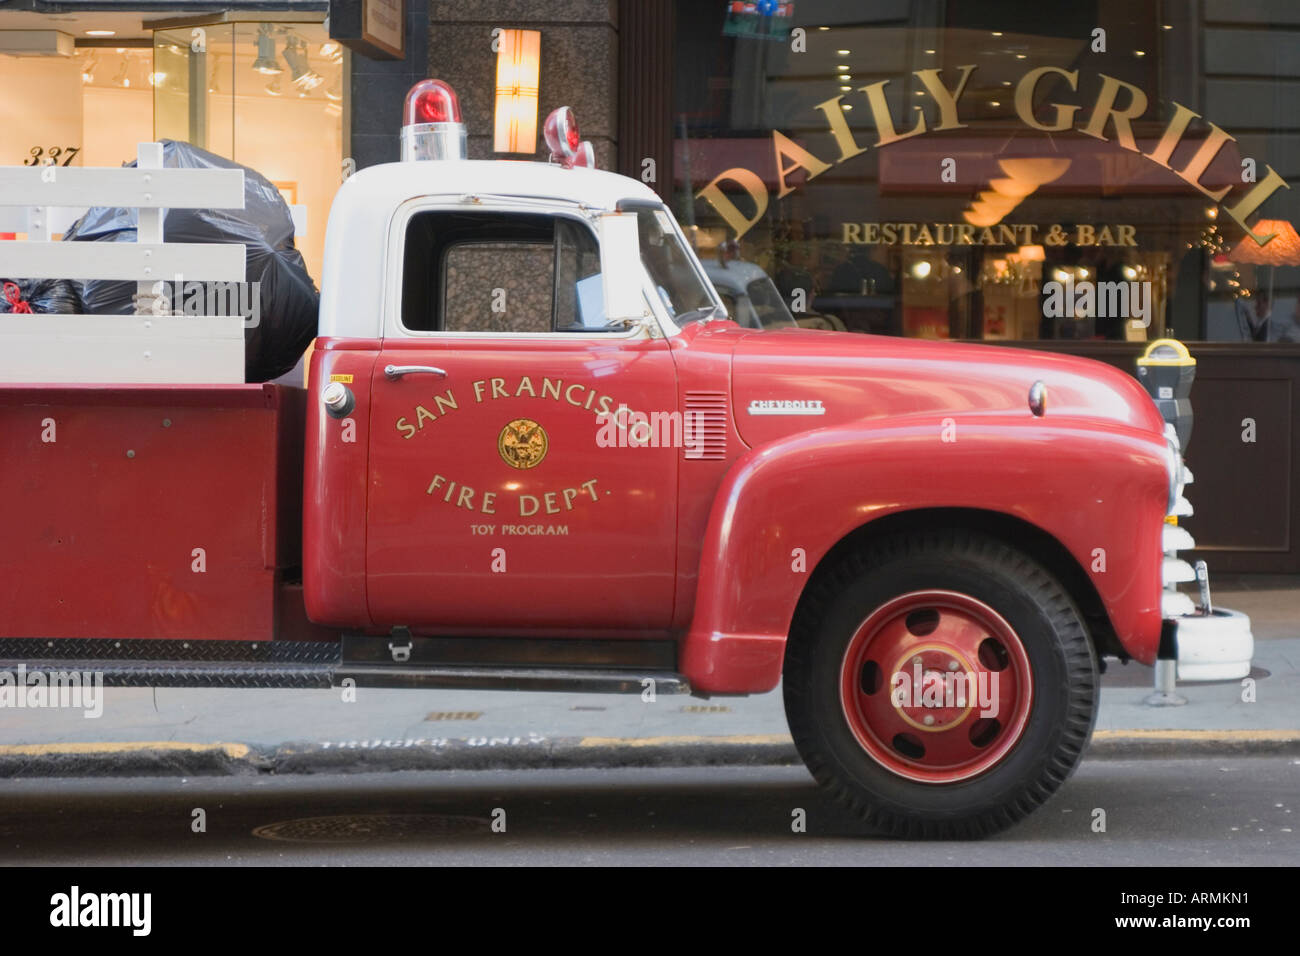 Vintage fire truck used for the San Francisco Fire Department Toy Program during the Christmas season Stock Photo